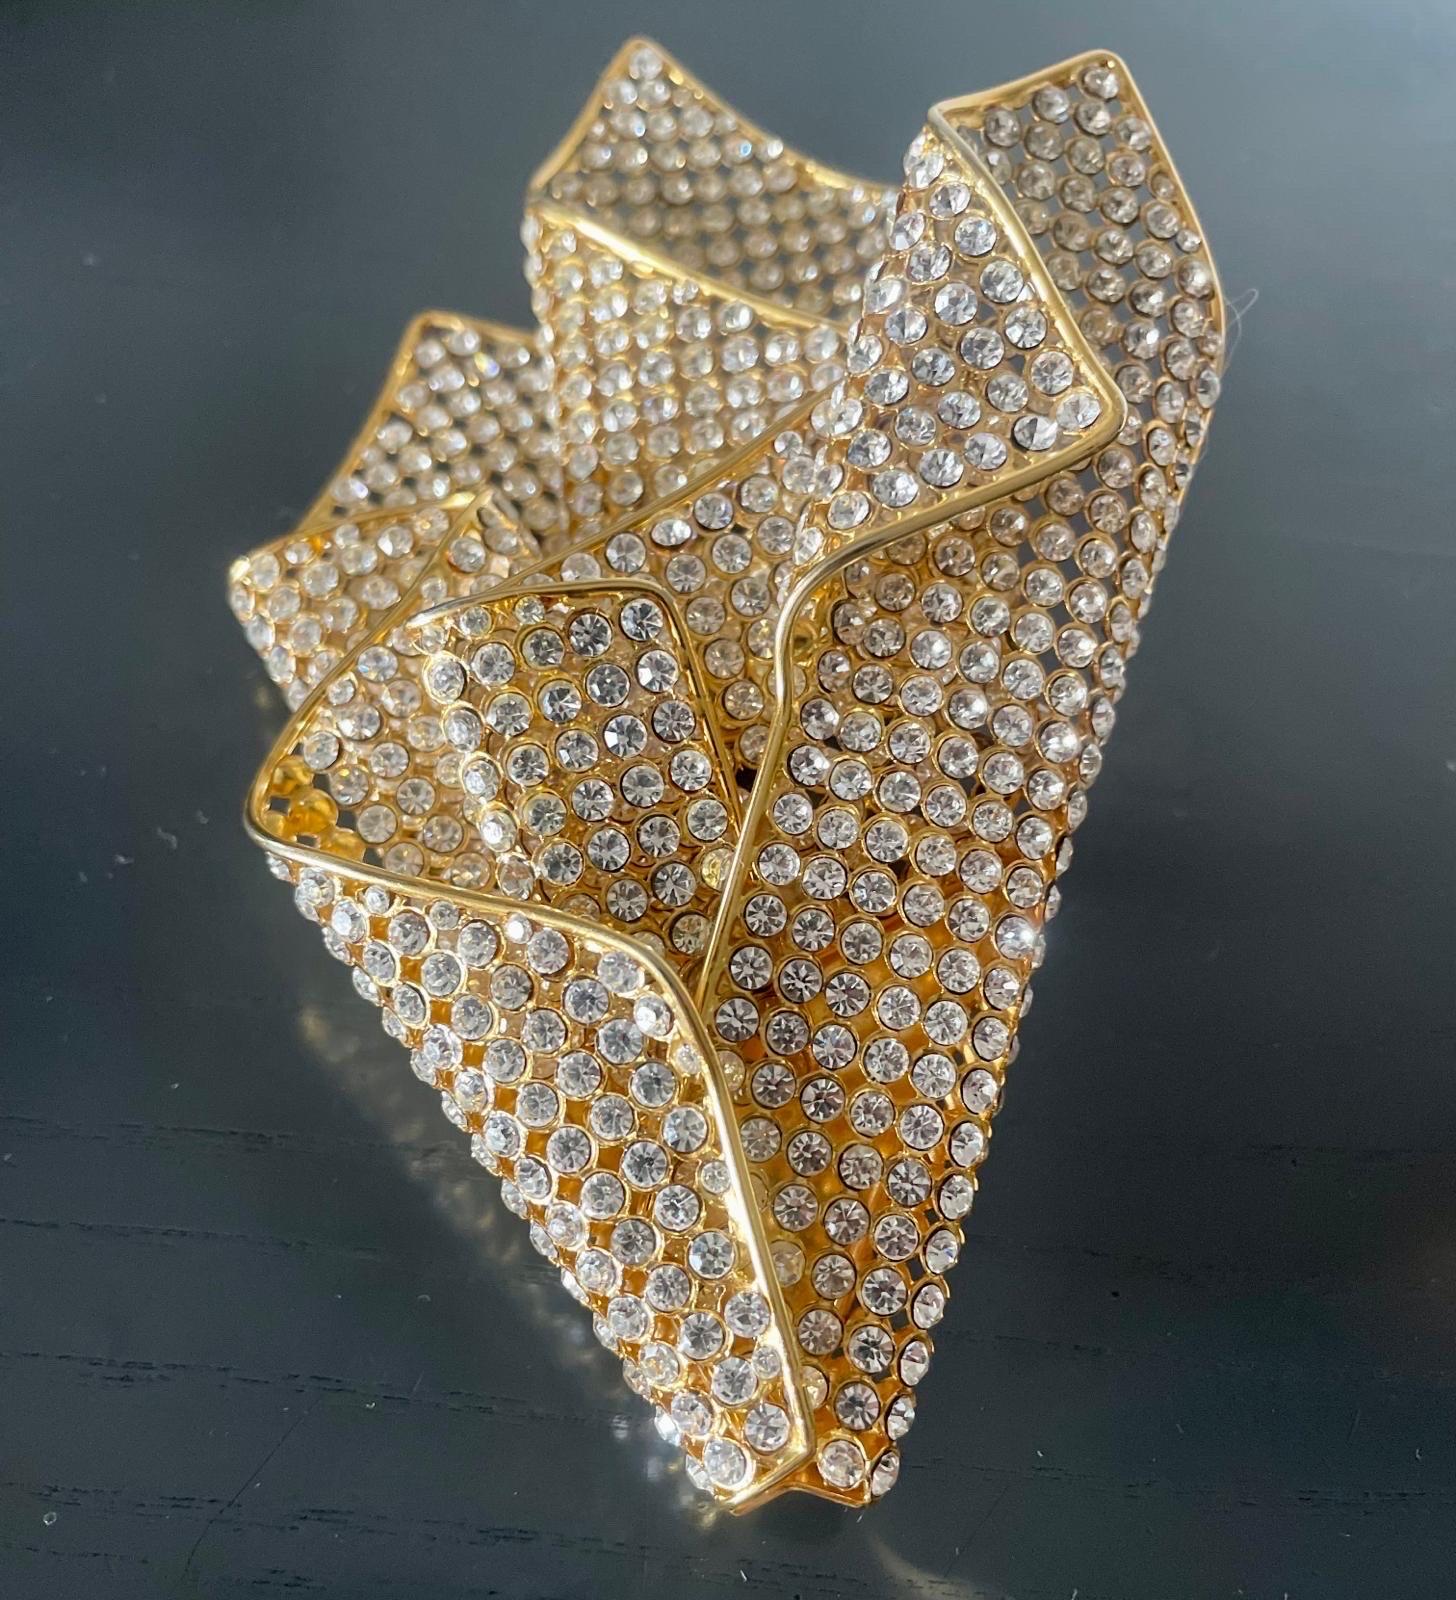 Valentino brooch. 1980s. Shaped like a drape in golden metal and sparkling rhinestones. 
Measurements: 11 cm X 15 cm
Very rare, collectible accessory. Like new, excellent condition.